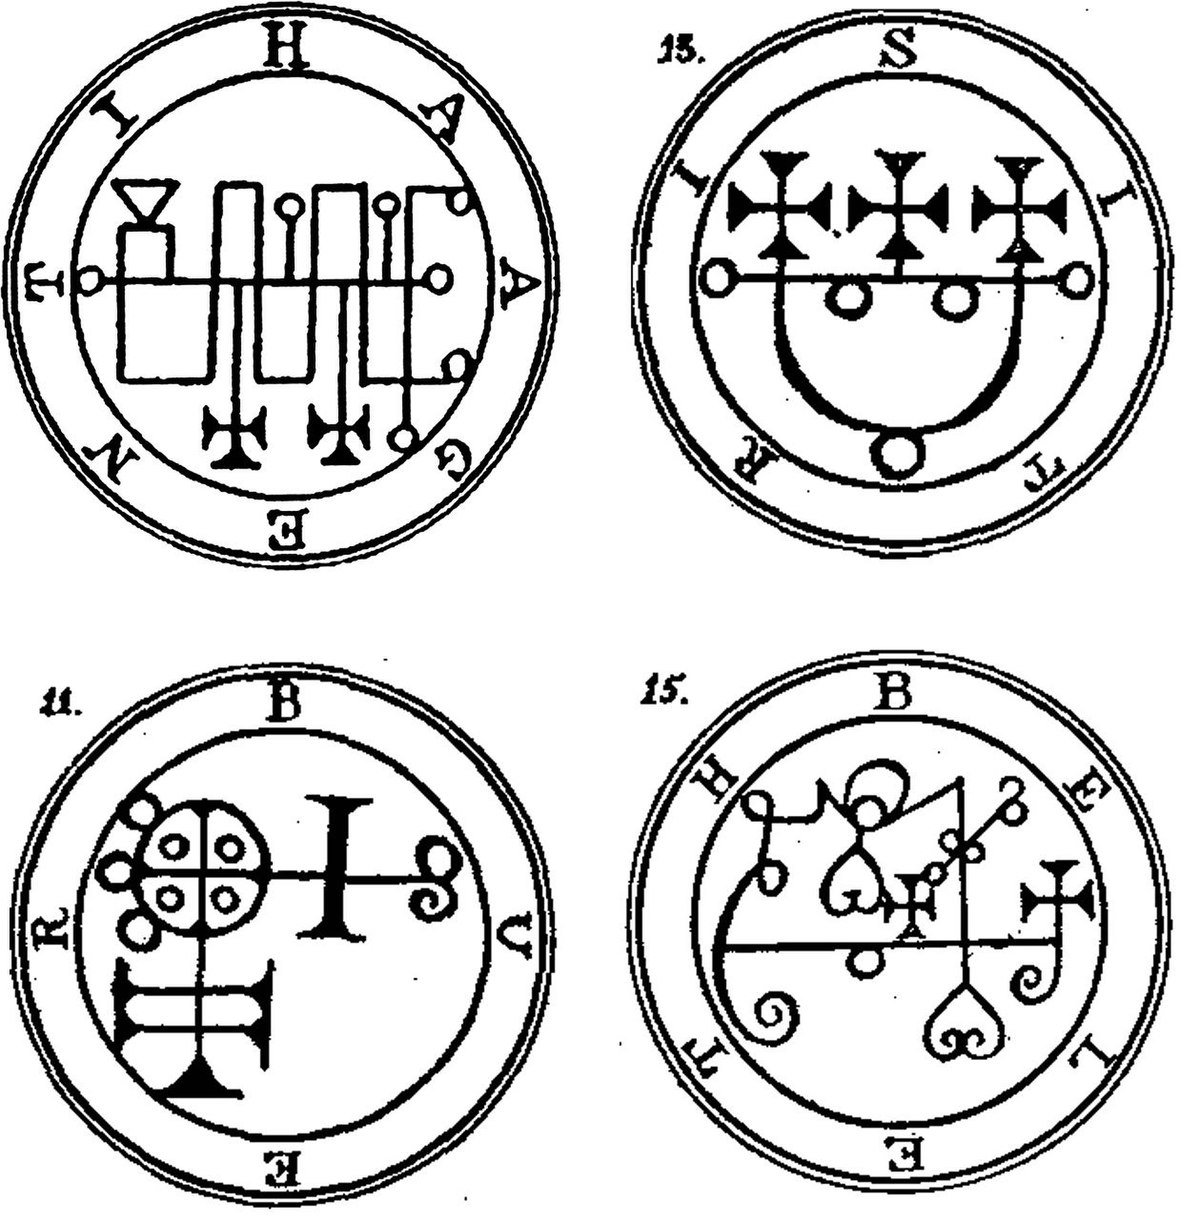 enochian sigils and their meanings